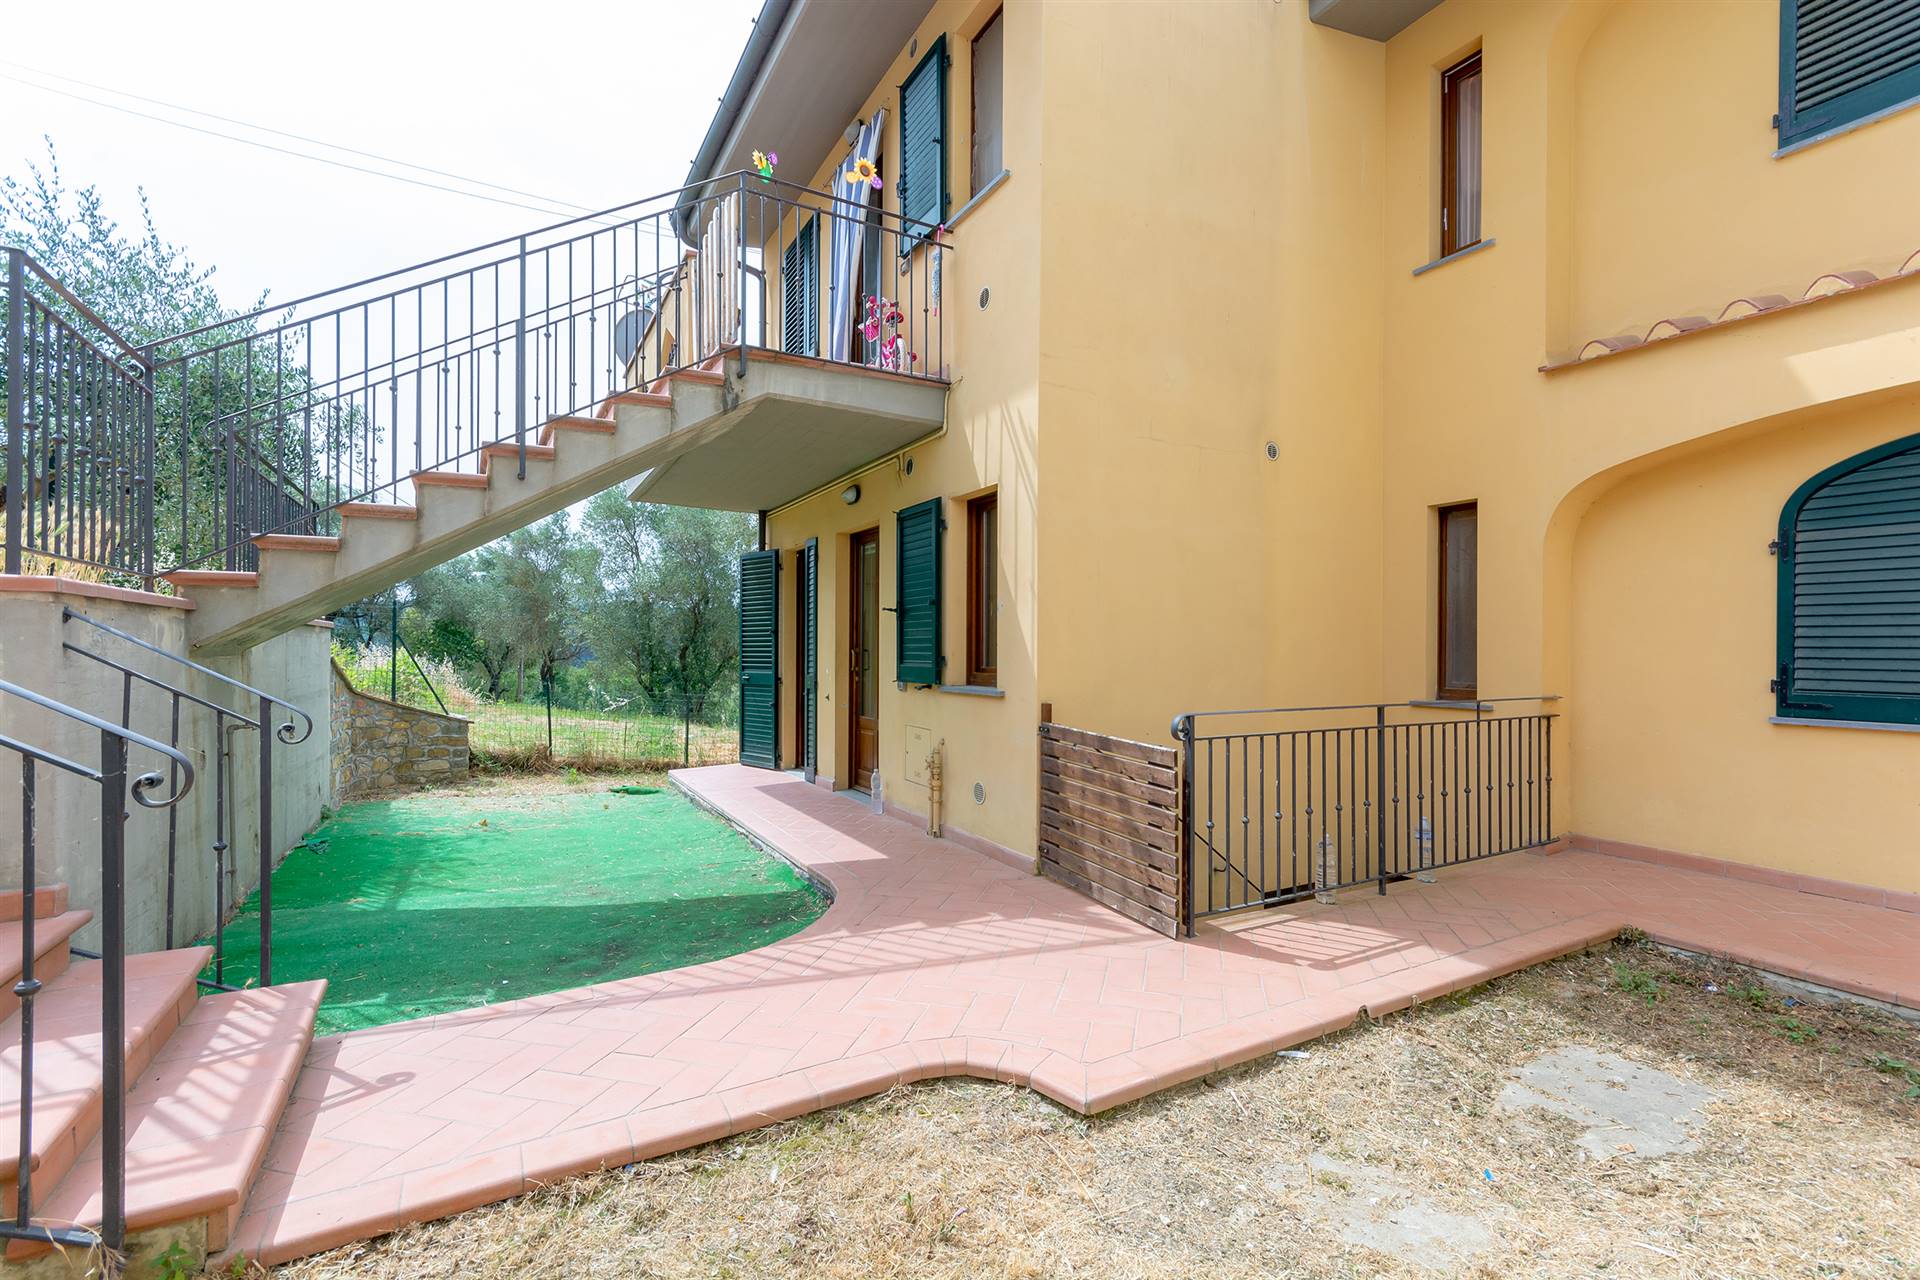 COMEANA, CARMIGNANO, terraced house for sale of 164 Sq. mt., Good condition, Heating Individual heating system, Energetic class: G, placed at Ground 